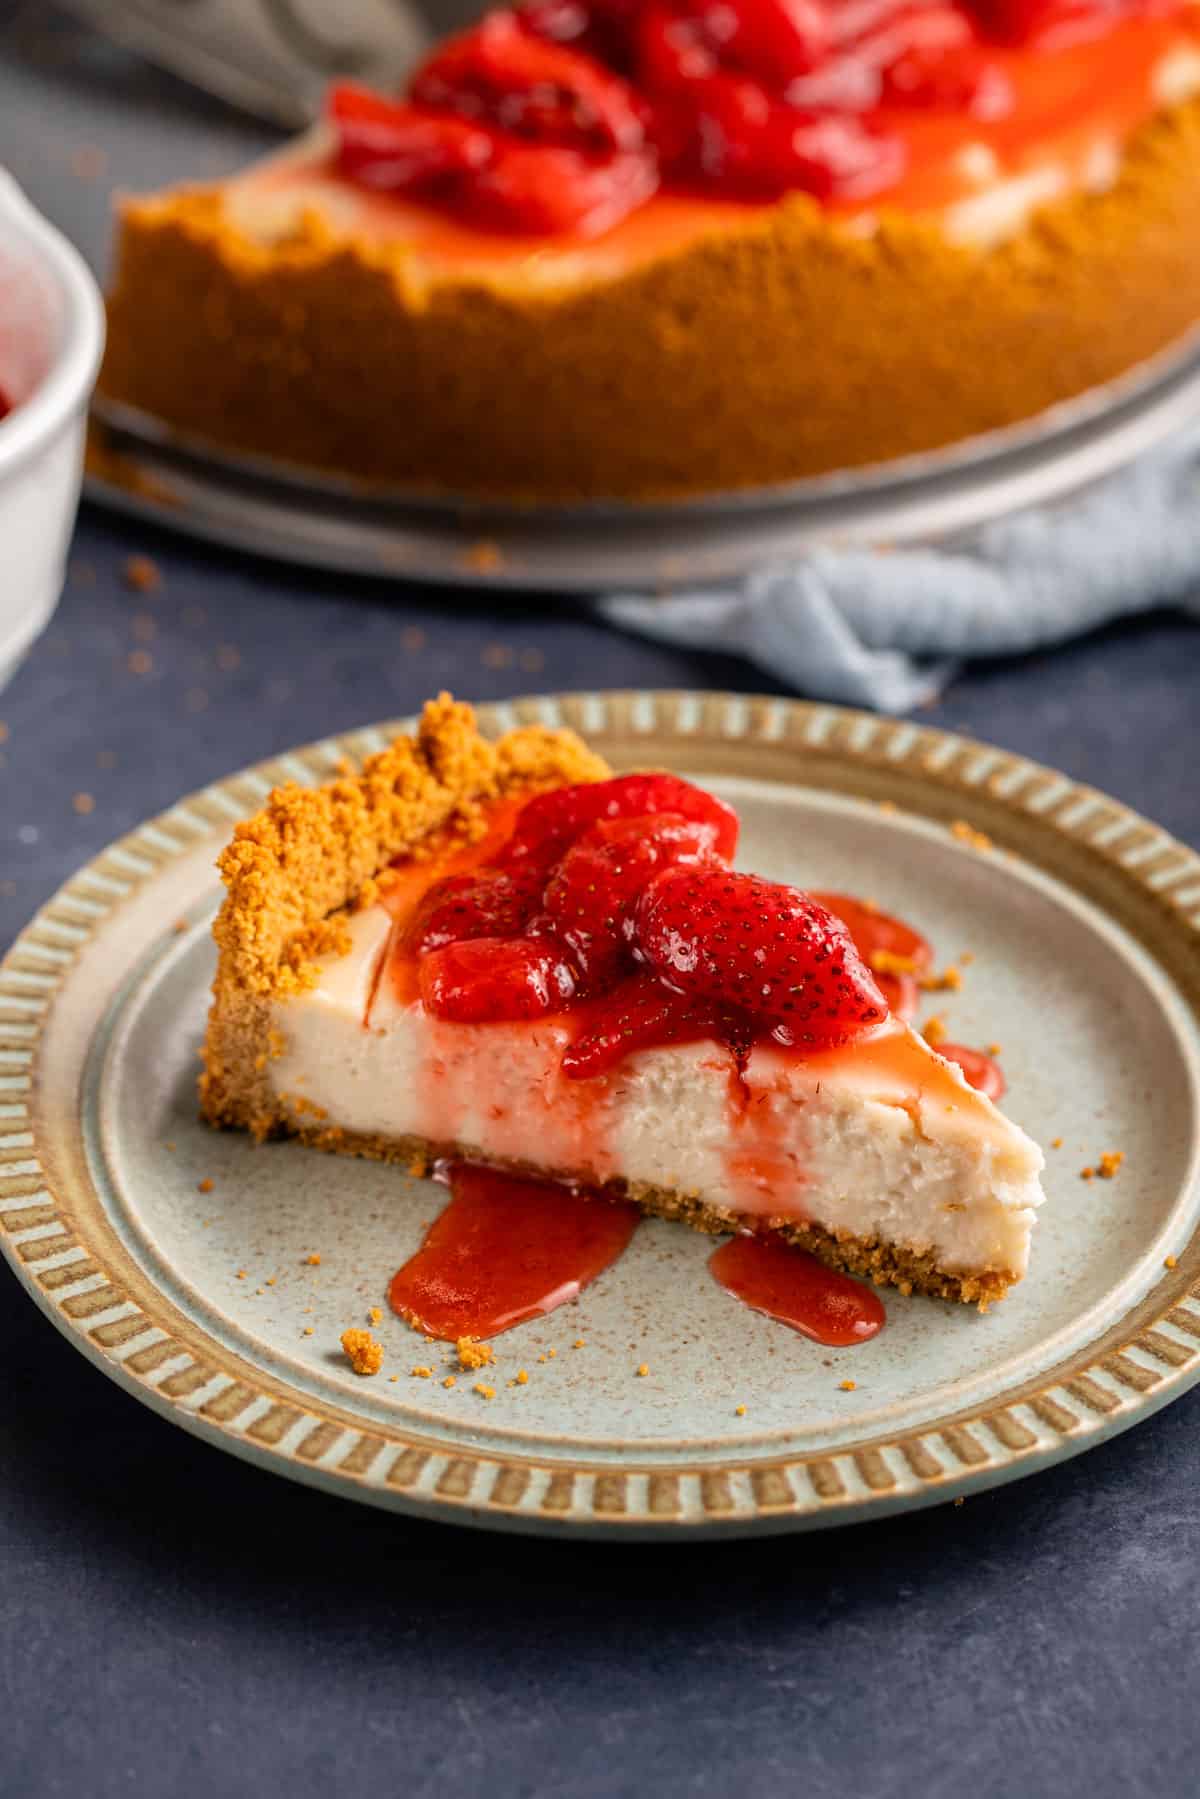 vegan cheesecake with strawberry sauce on light blue plate